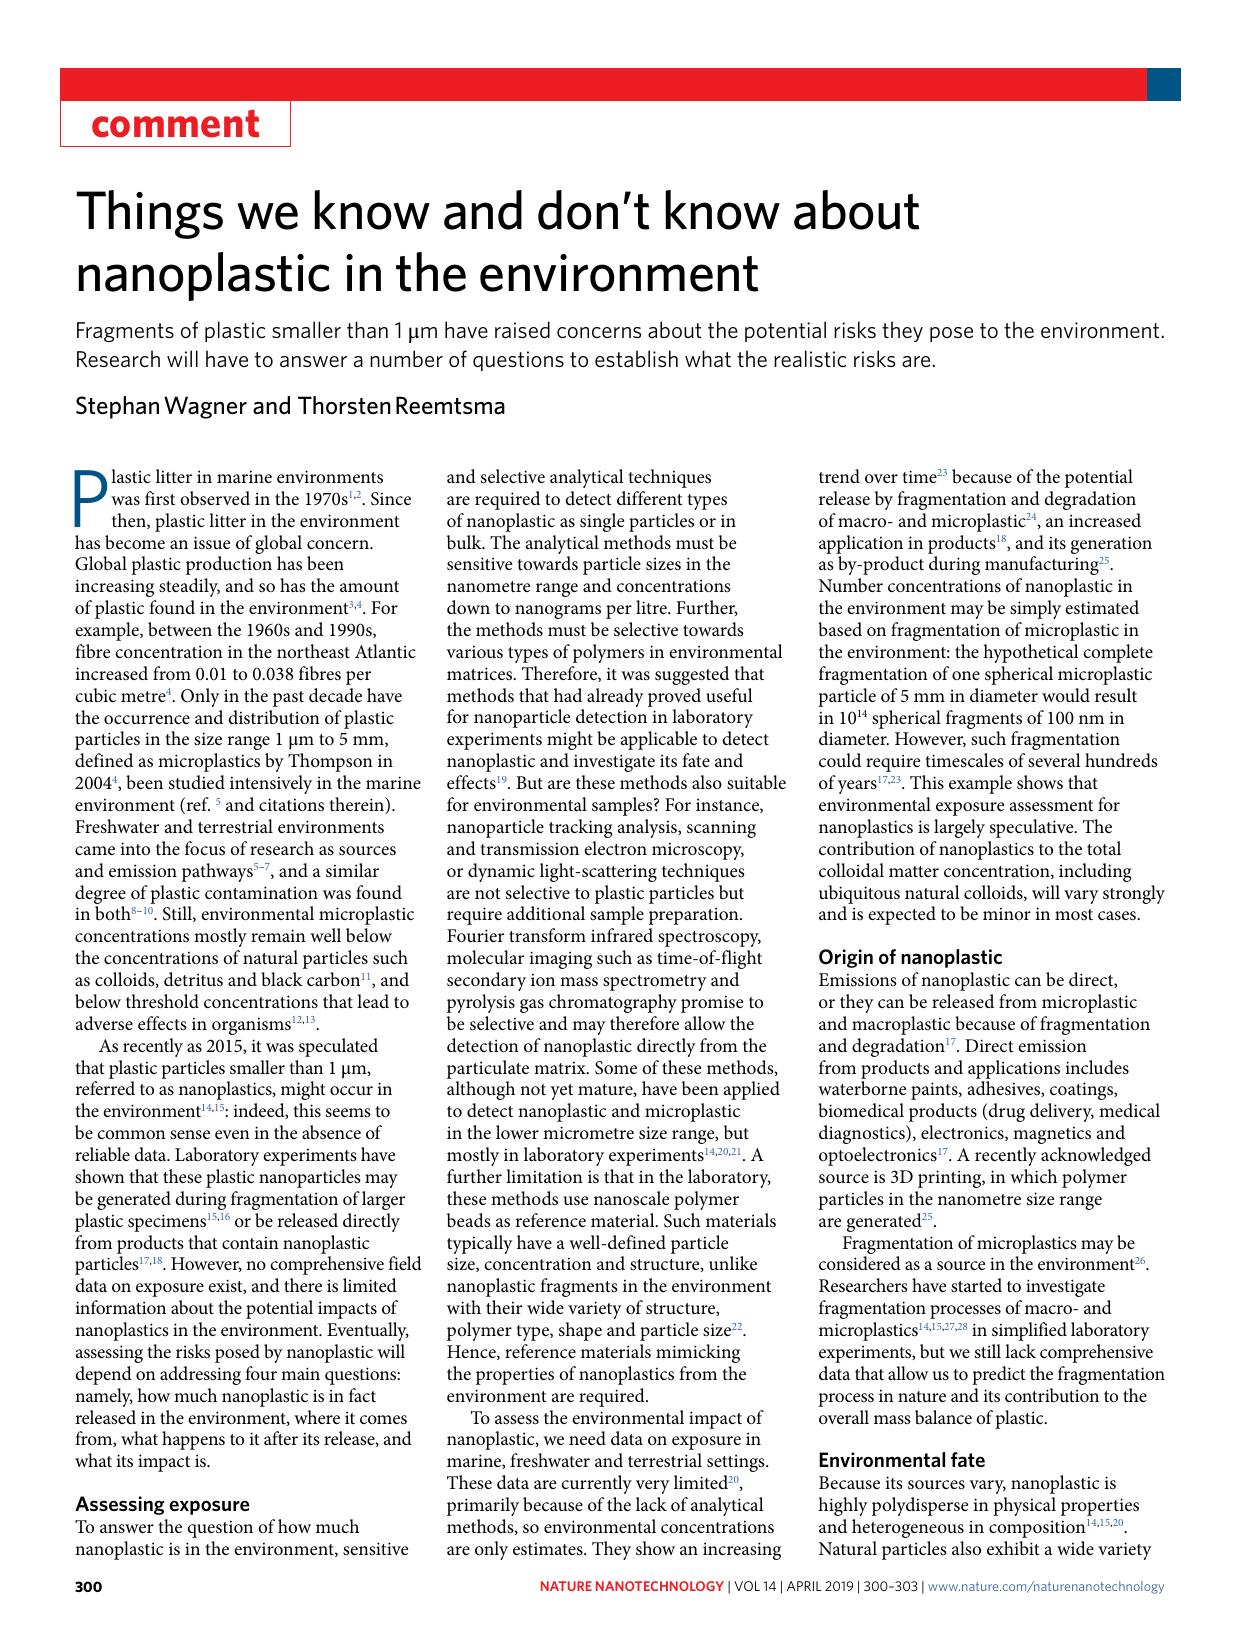 Things we know and donât know about nanoplastic in the environment by Stephan Wagner